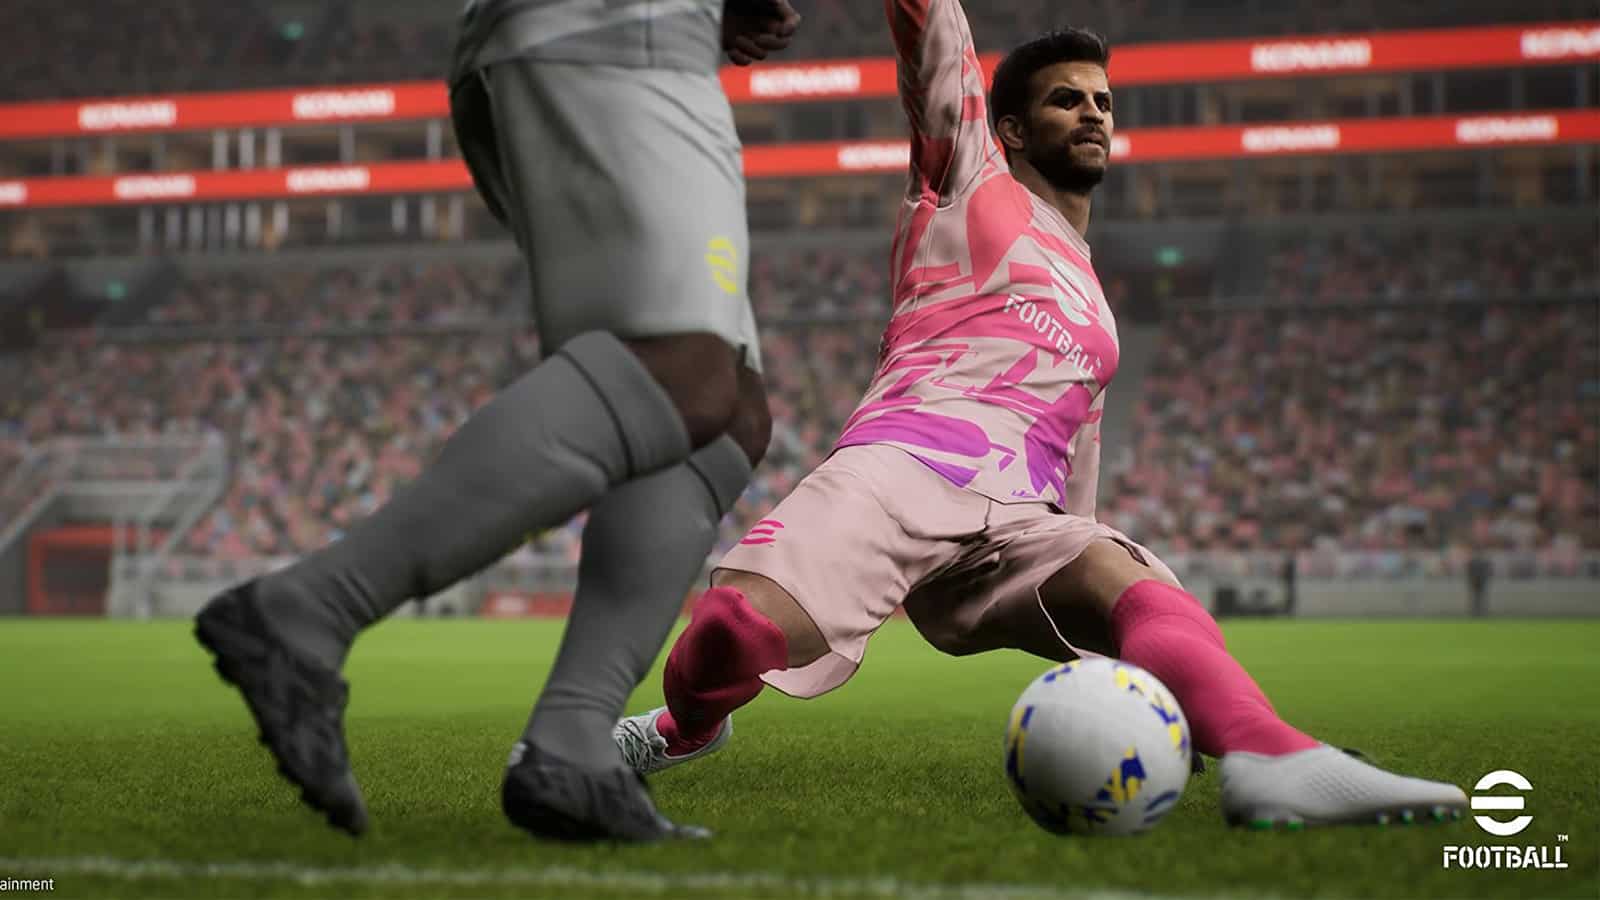 eFootball PES 23 How To Get Unlimited Coins #efootball2022